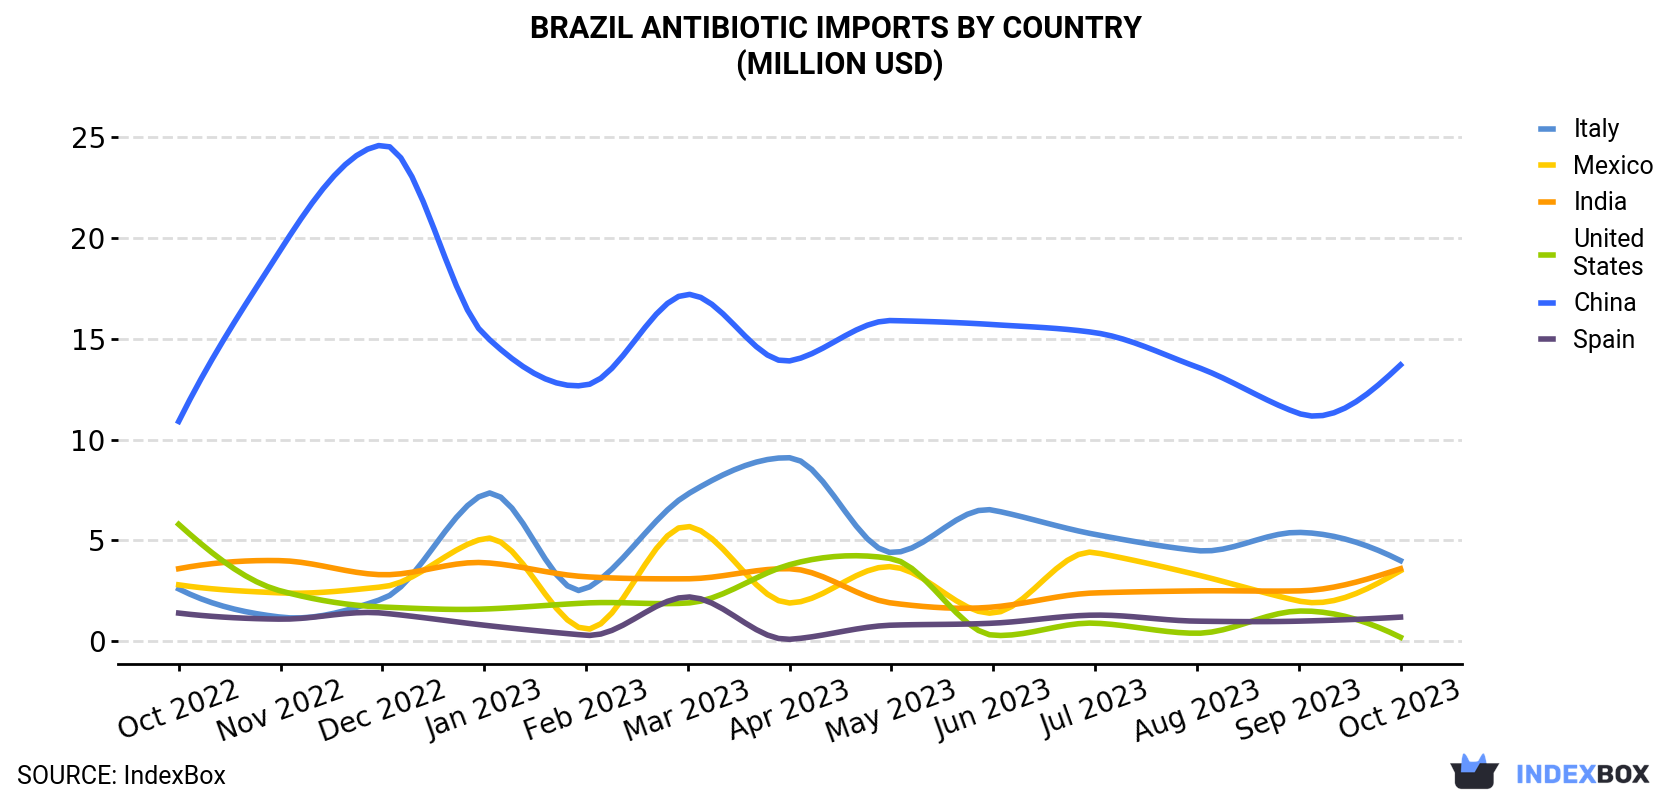 Brazil Antibiotic Imports By Country (Million USD)